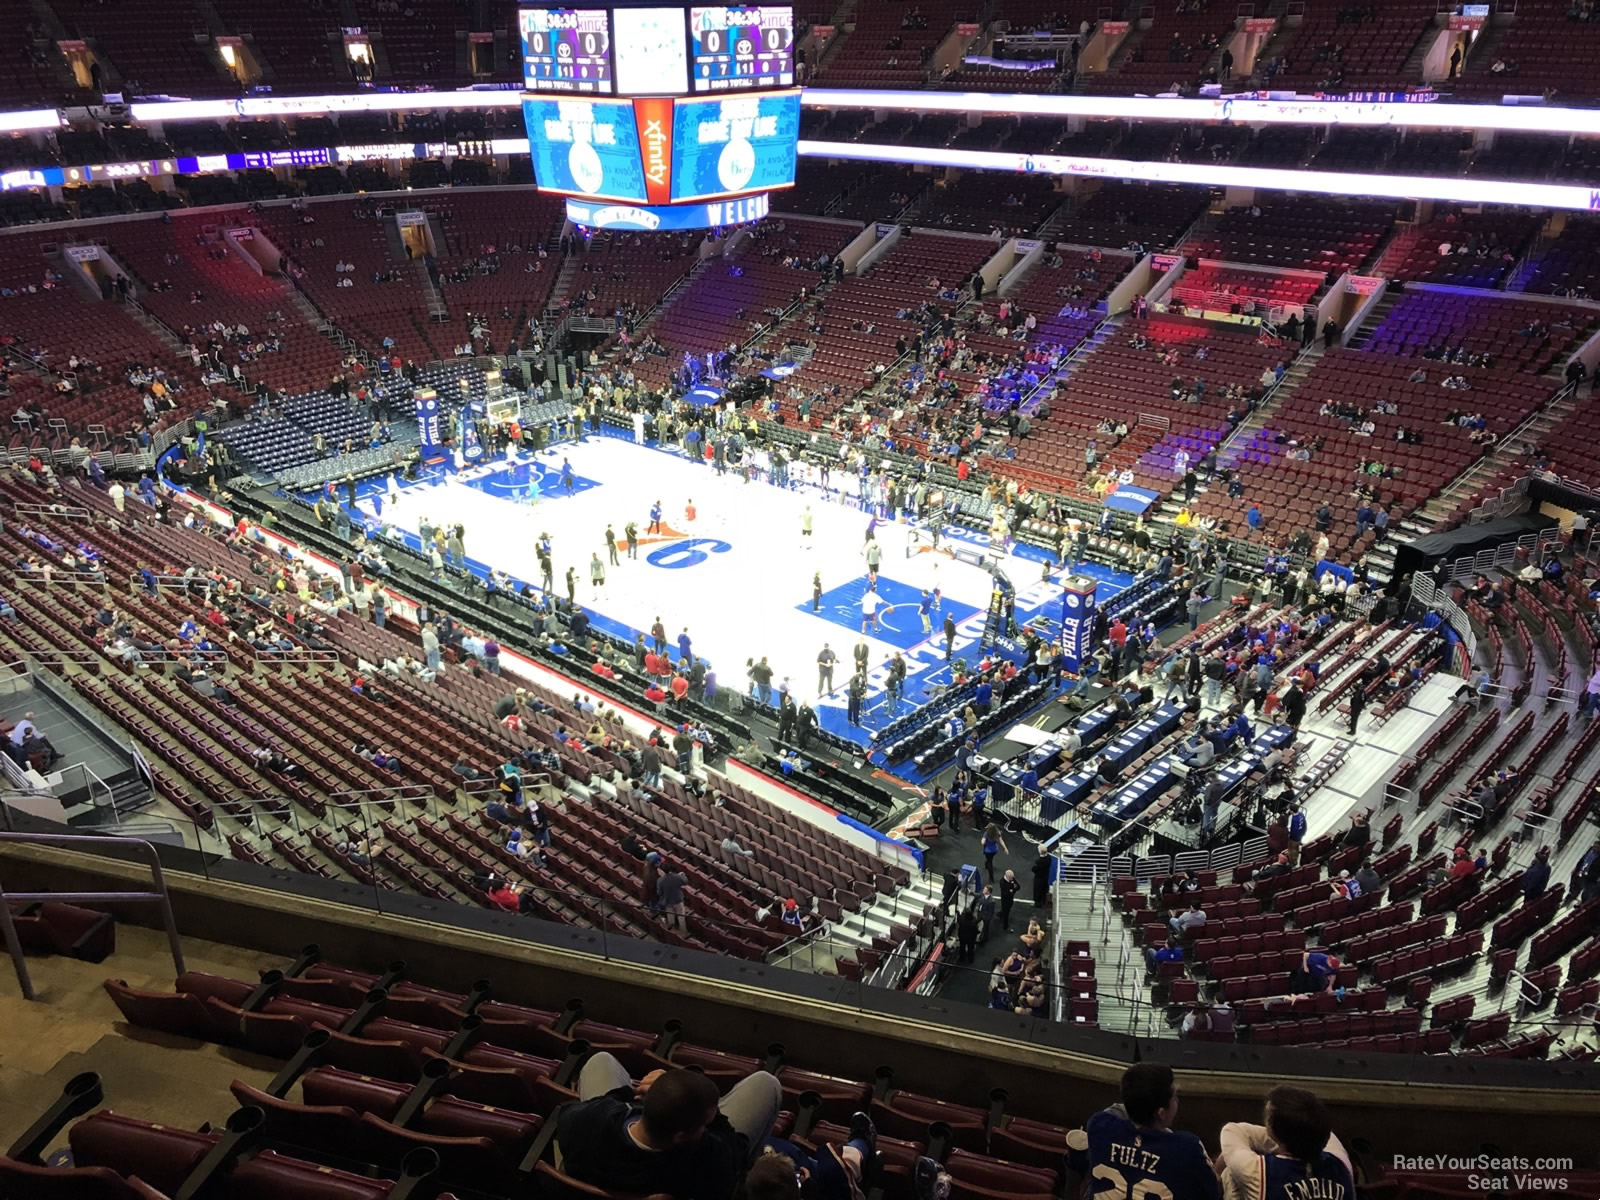 section 216a, row 7 seat view  for basketball - wells fargo center